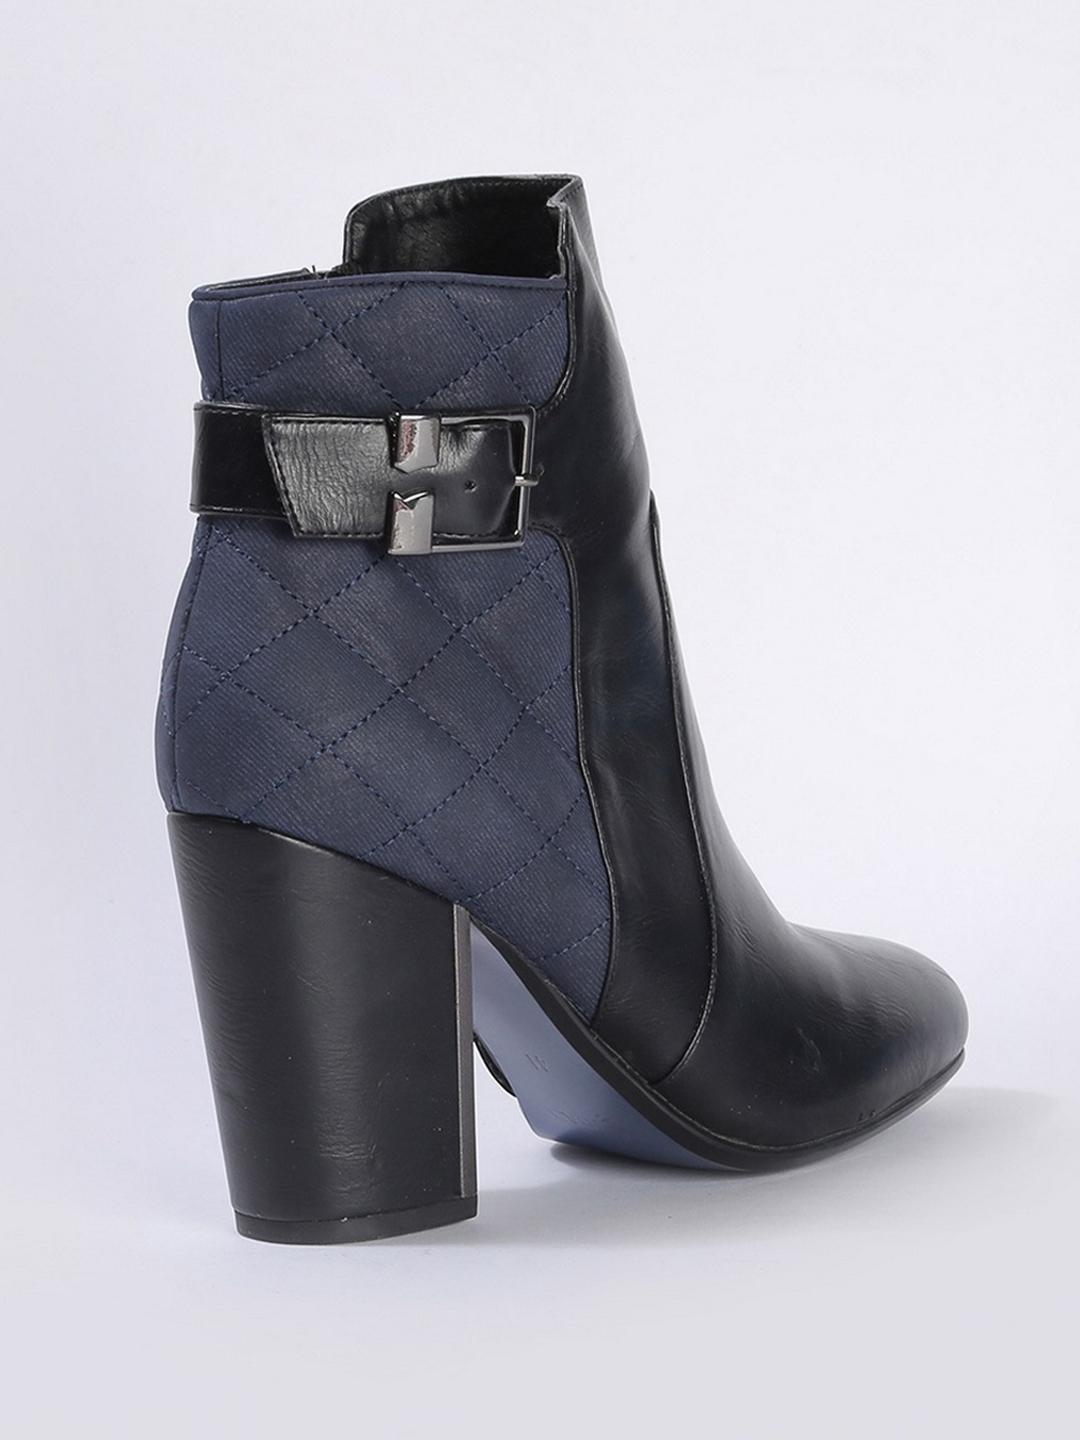 Women's buckle closure Holly boots